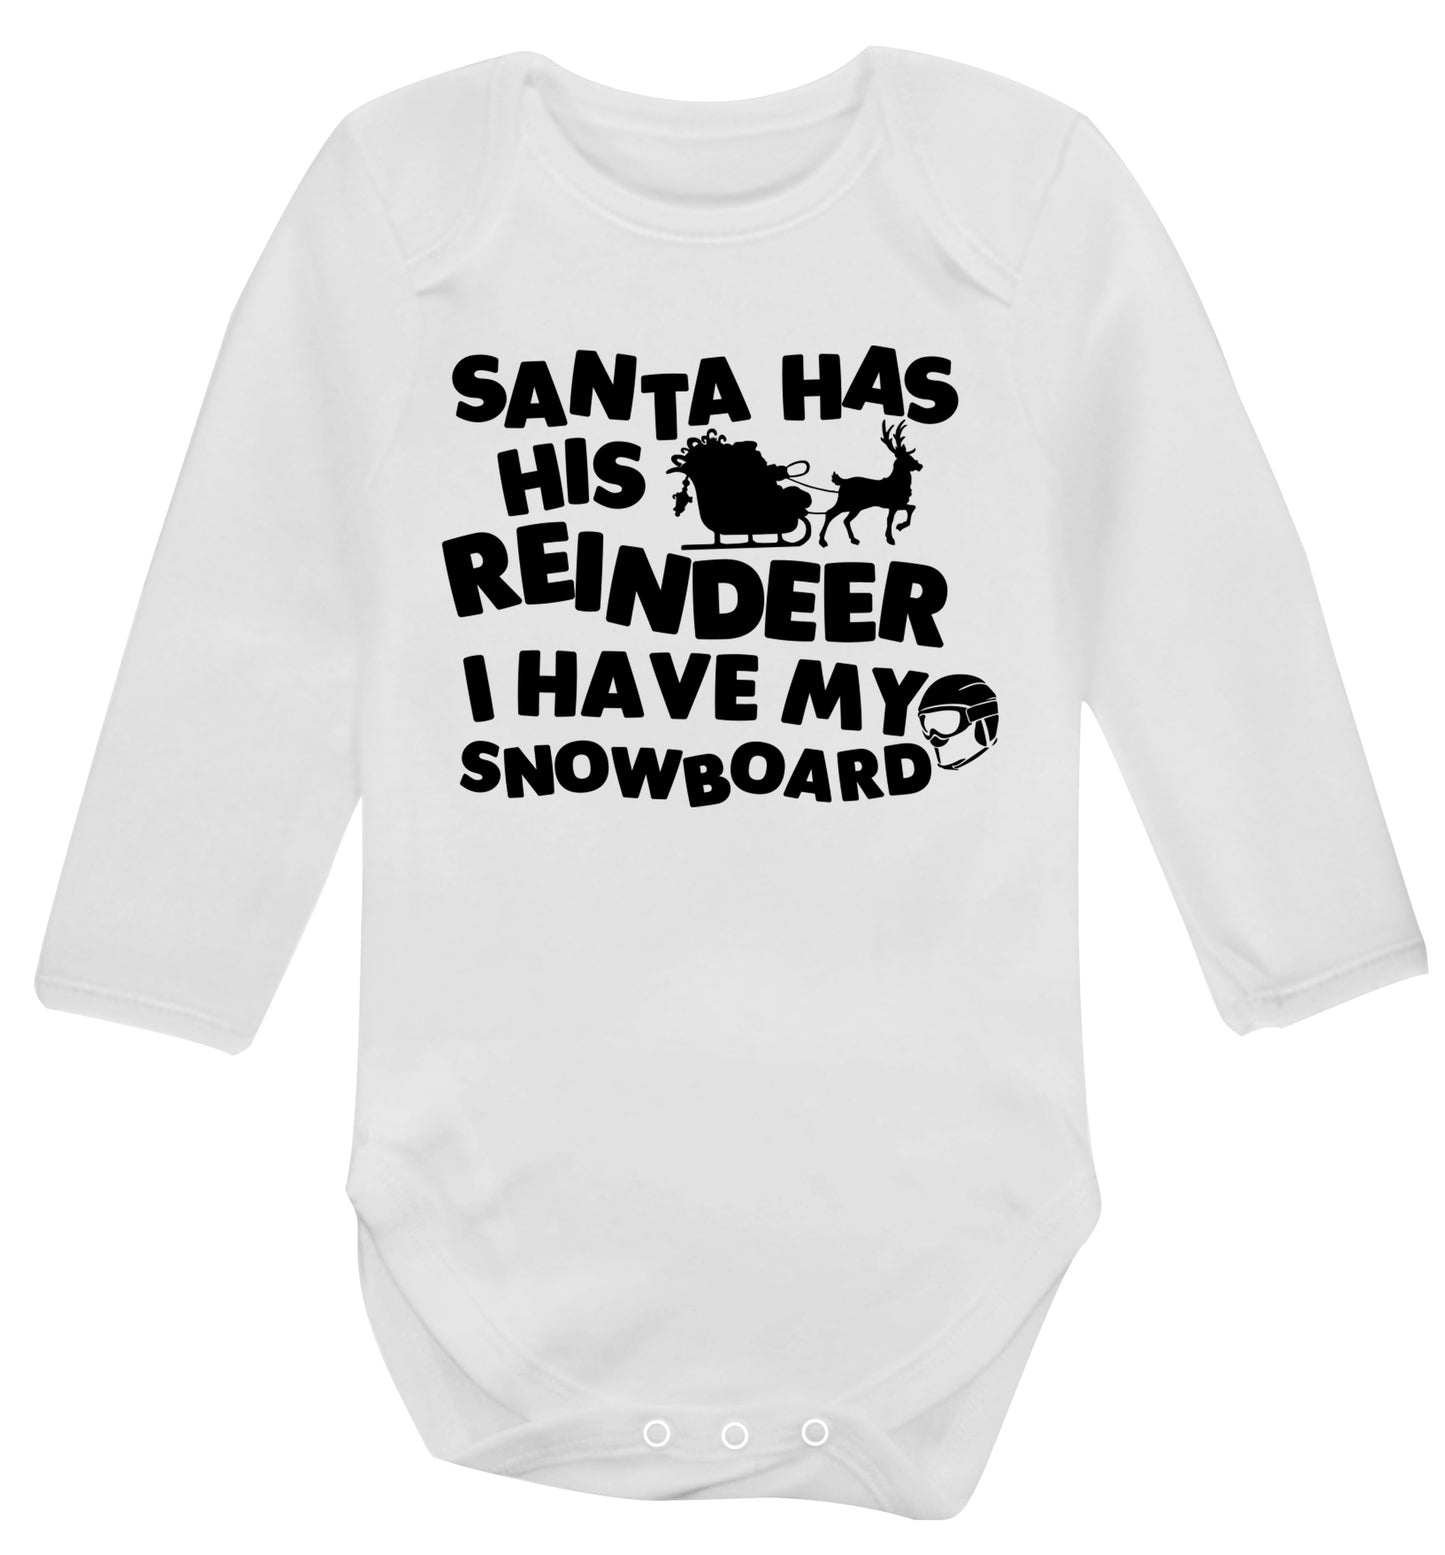 Santa has his reindeer I have my snowboard Baby Vest long sleeved white 6-12 months